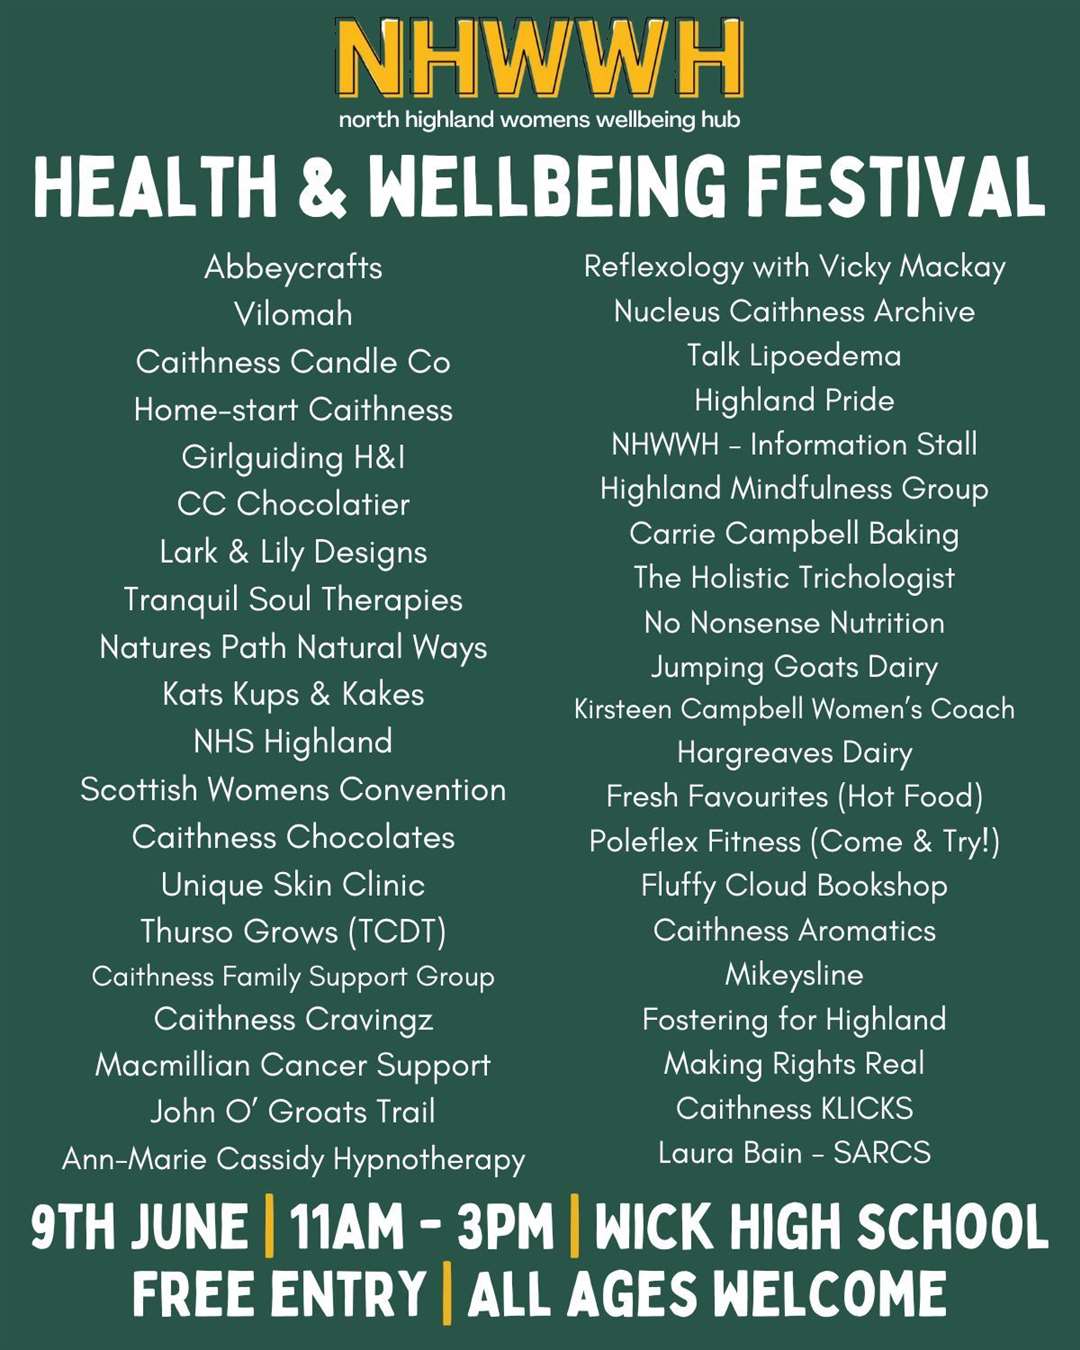 Poster for the NHWWH Health and Wellbeing Festival taking place in Wick in June.